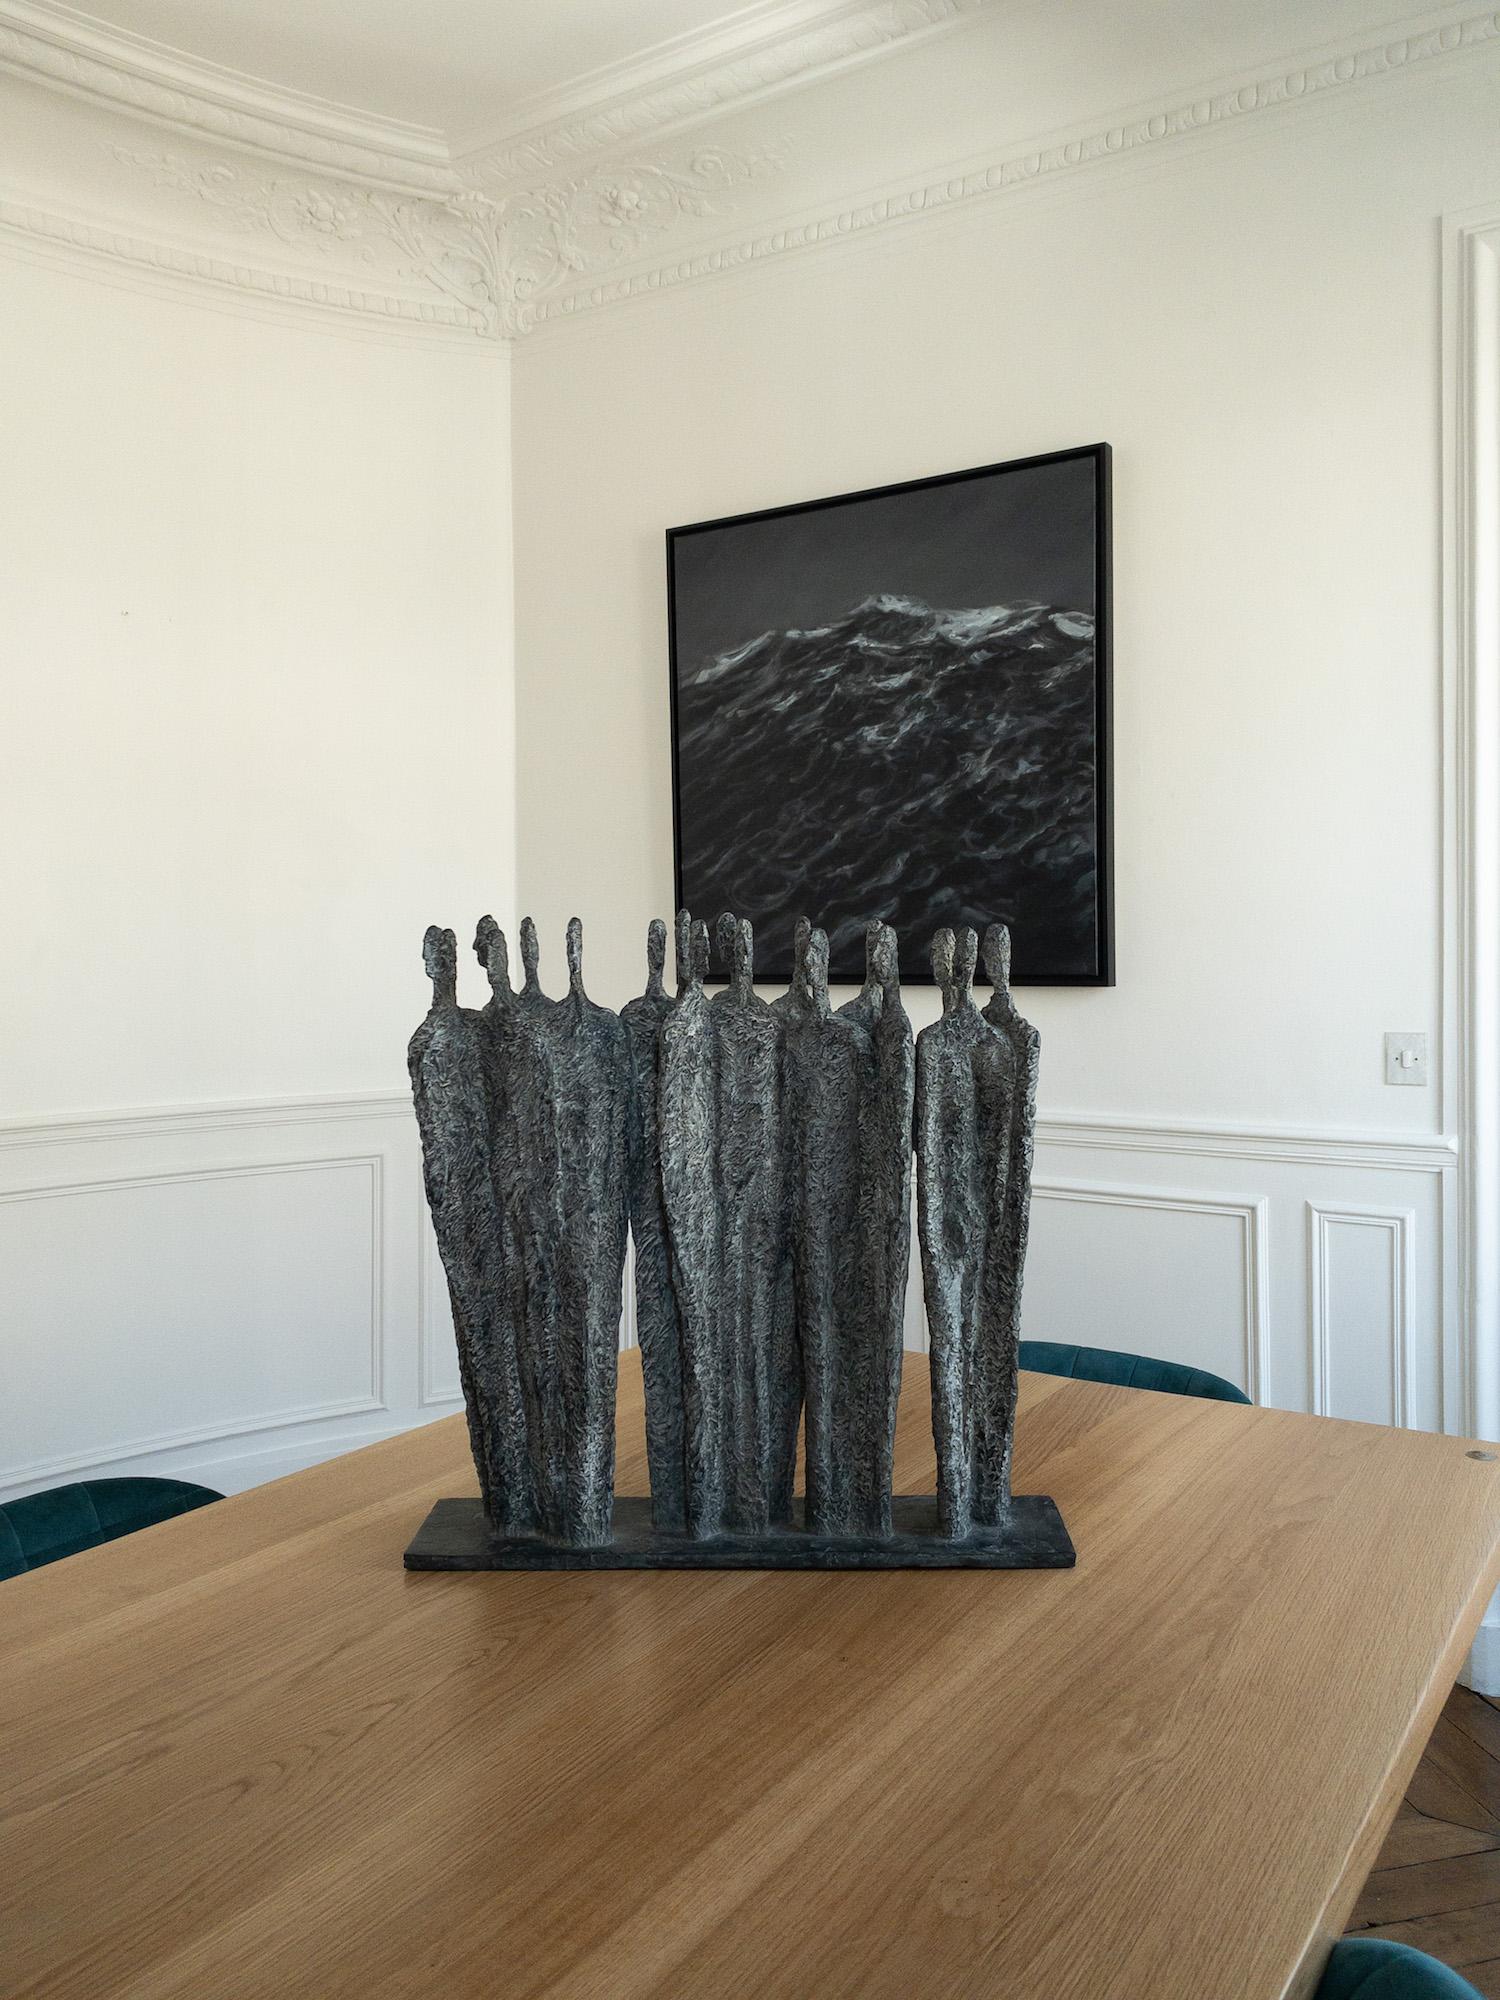 Bronze sculpture, 60 cm × 59 cm × 15 cm. Limited edition of 8 + 4 A.P., each signed and numbered.
Dimensions include the base of the sculpture, which is H 1 cm x W 59 cm x D 14 cm. 

Photo credit: © Christian Baraja, © Martine Demal, @ ADAGP